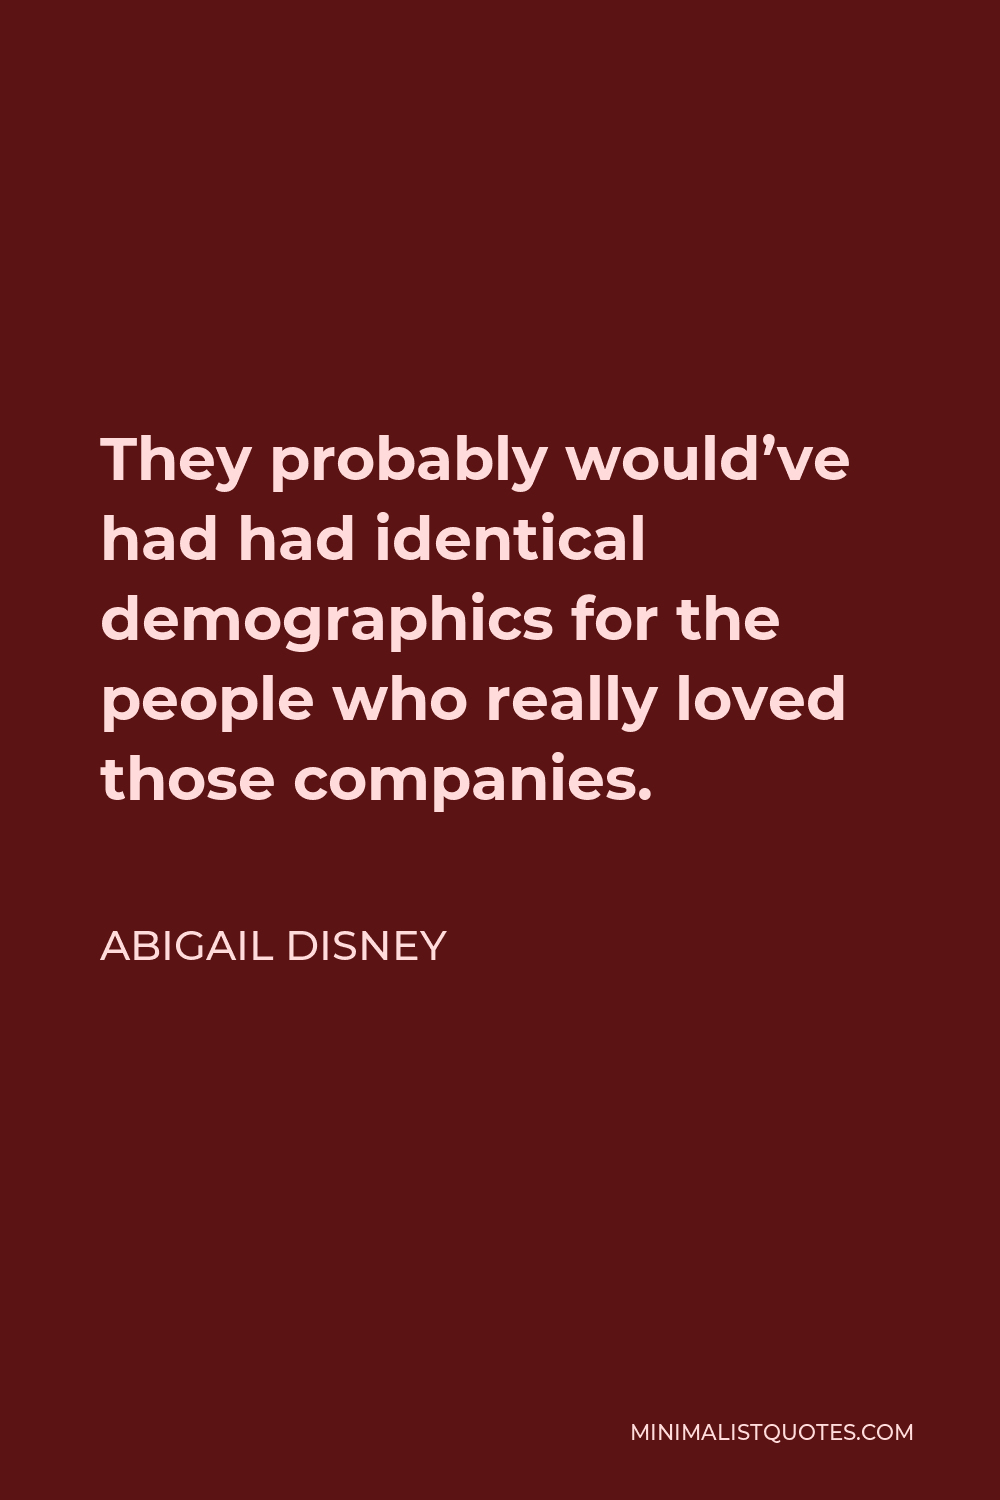 Abigail Disney Quote - They probably would’ve had had identical demographics for the people who really loved those companies.